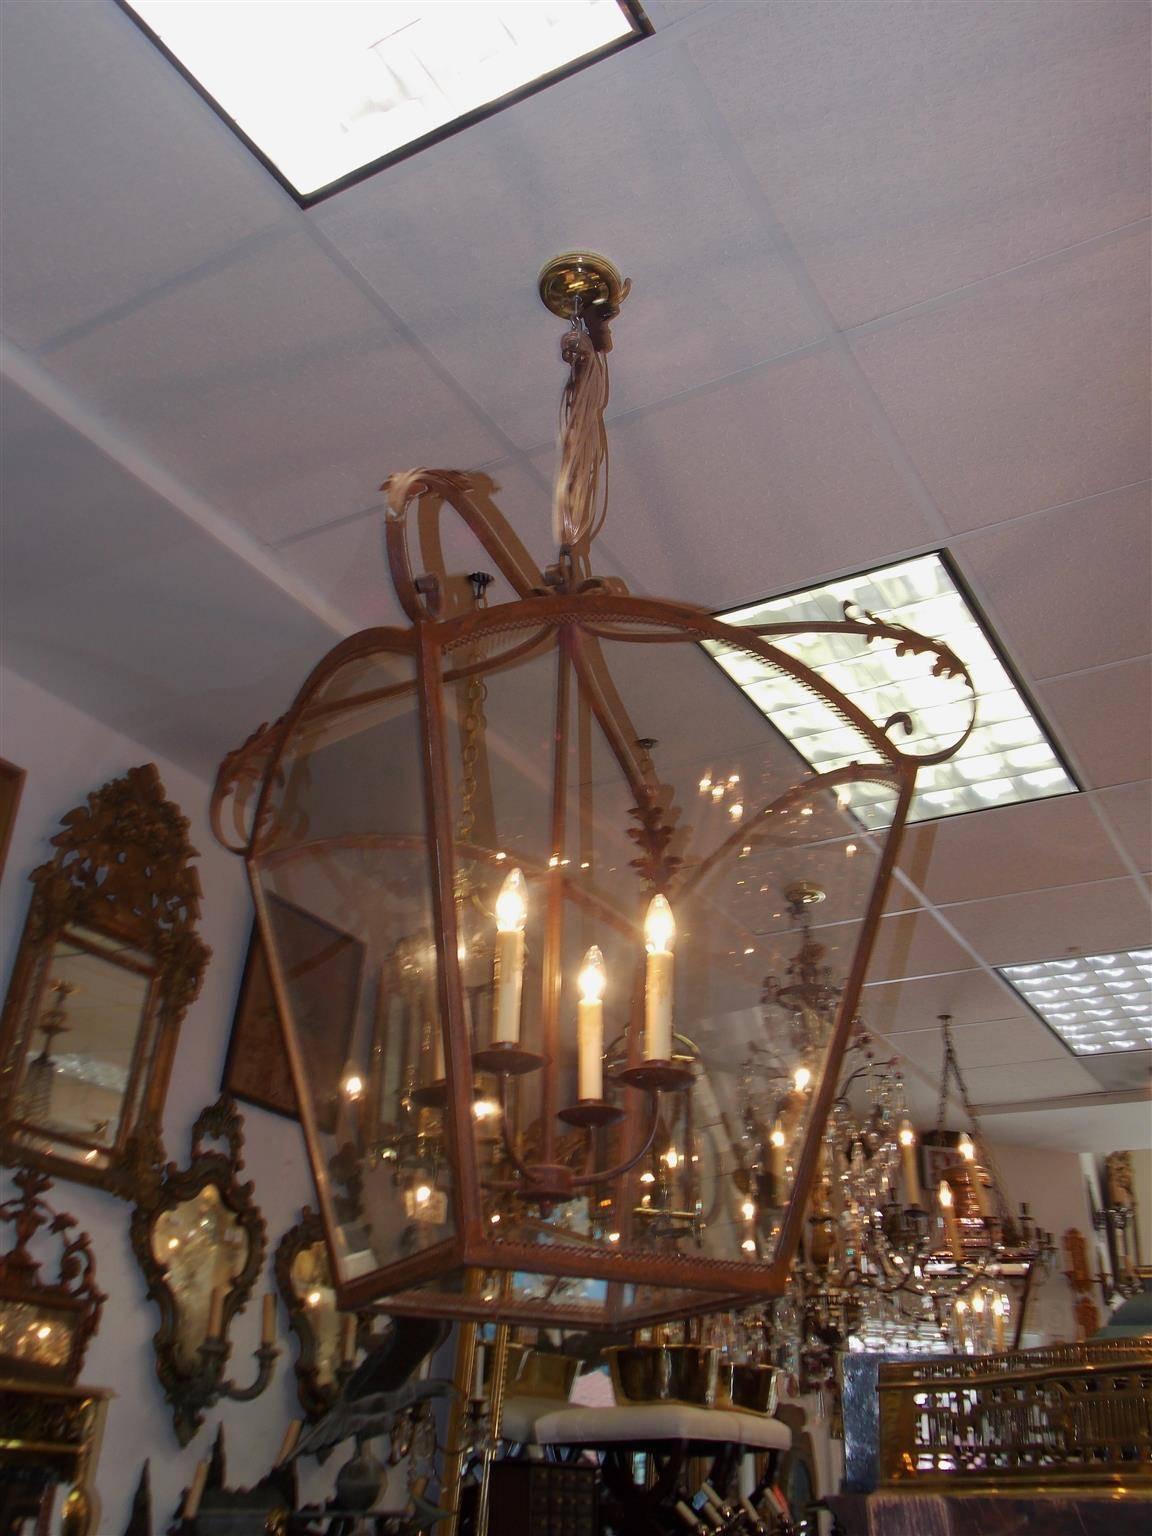 Italian wrought iron hanging glass four sided arched dome lantern with pleasing pierced gallery, decorative scroll acanthus motif, and a four-light interior cluster, Late 19th century. Lantern was originally candle powered and has been electrified.